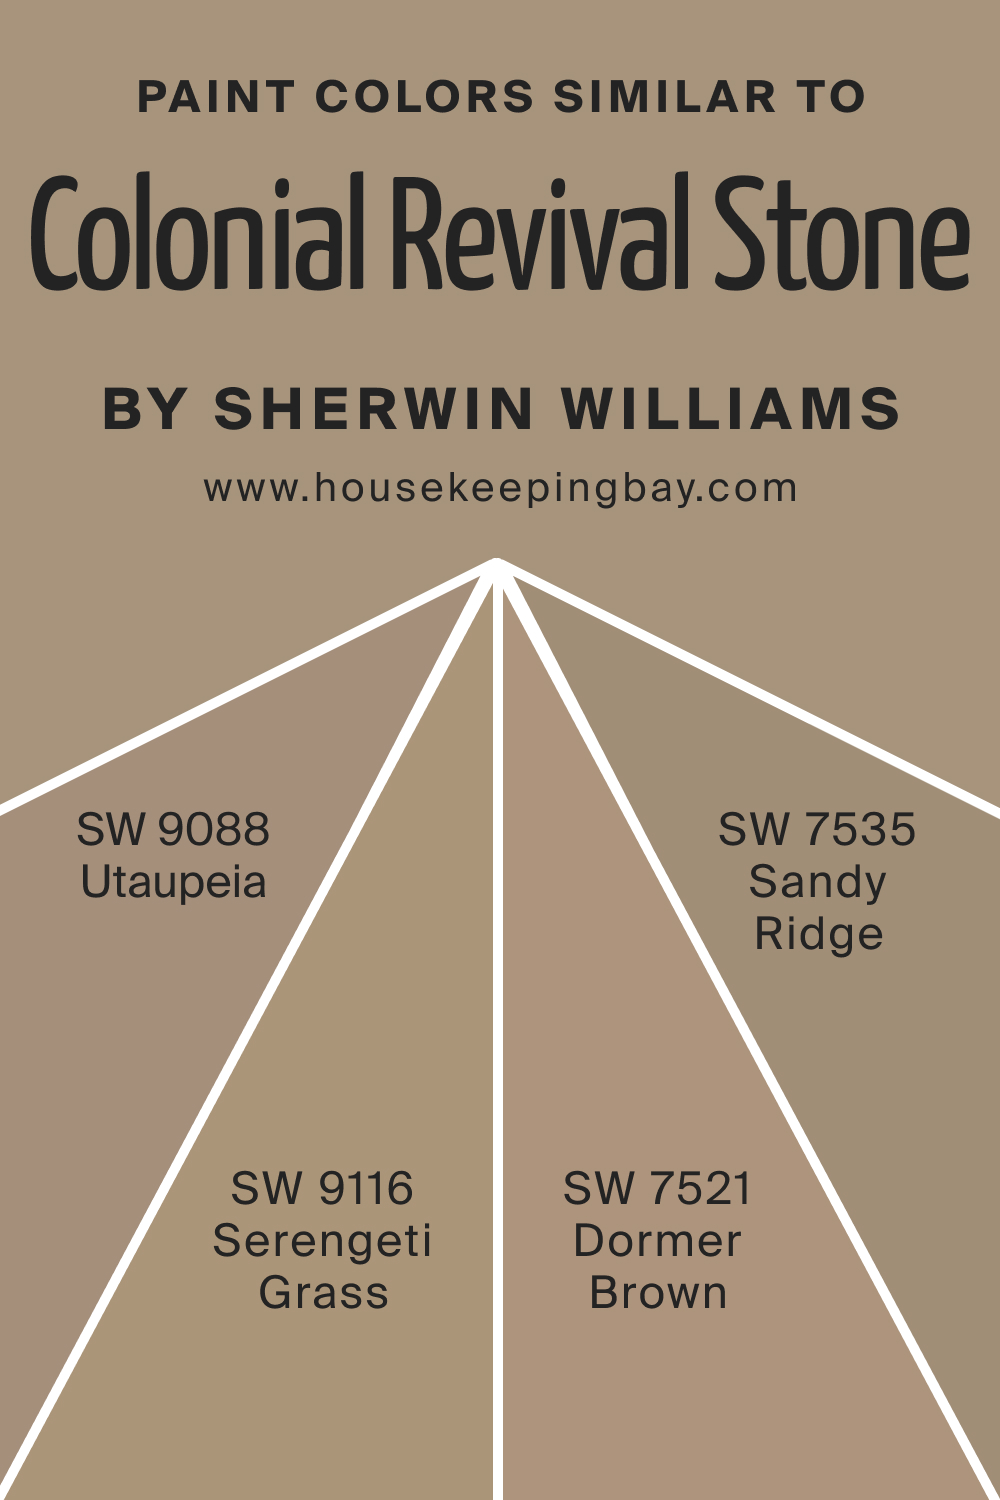 Paint Color Similar to SW 2827 Colonial Revival Stone by Sherwin Williams